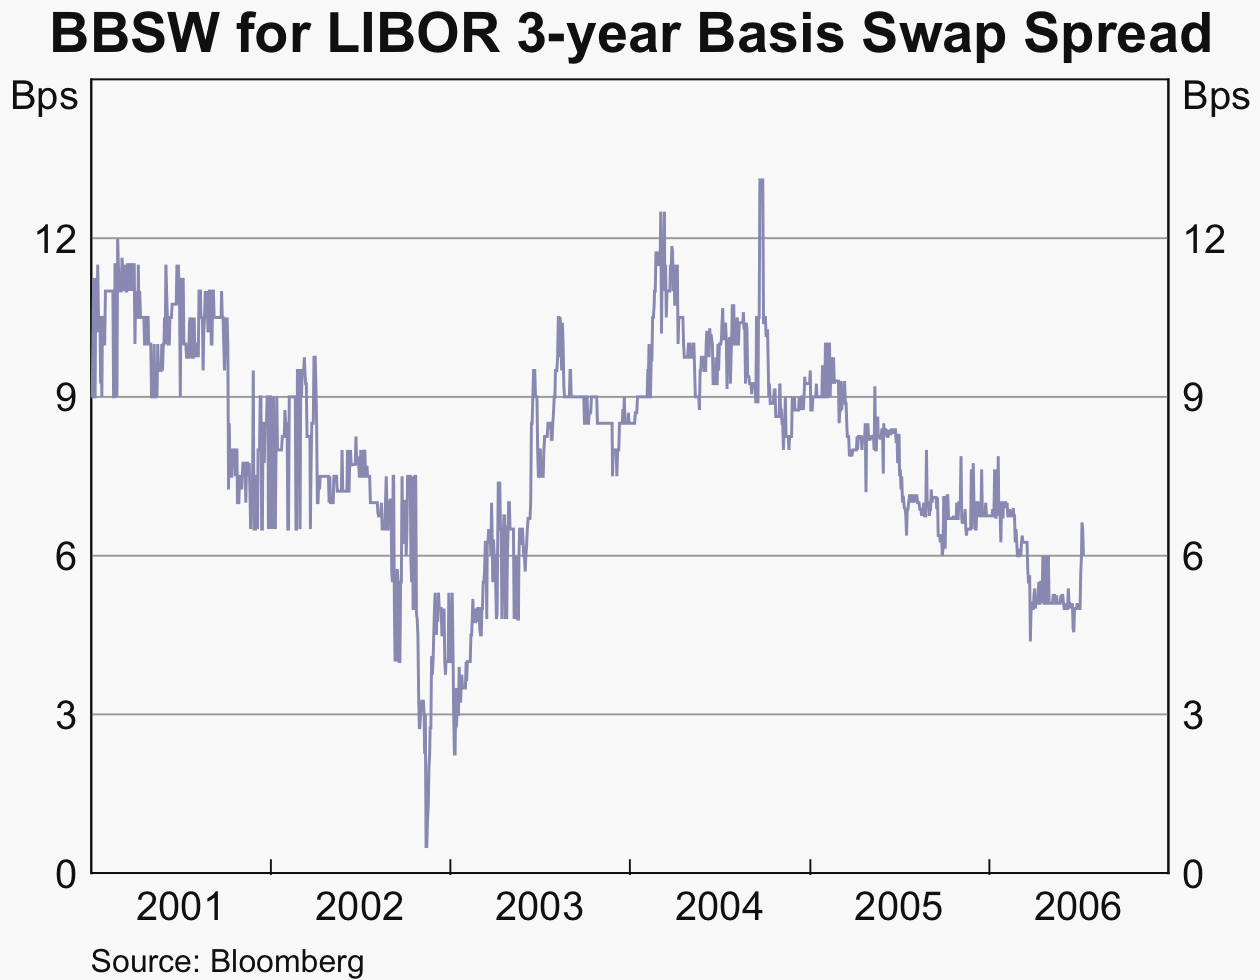 Graph 5: BBSW for LIBOR 3-year Basis Swap Spread